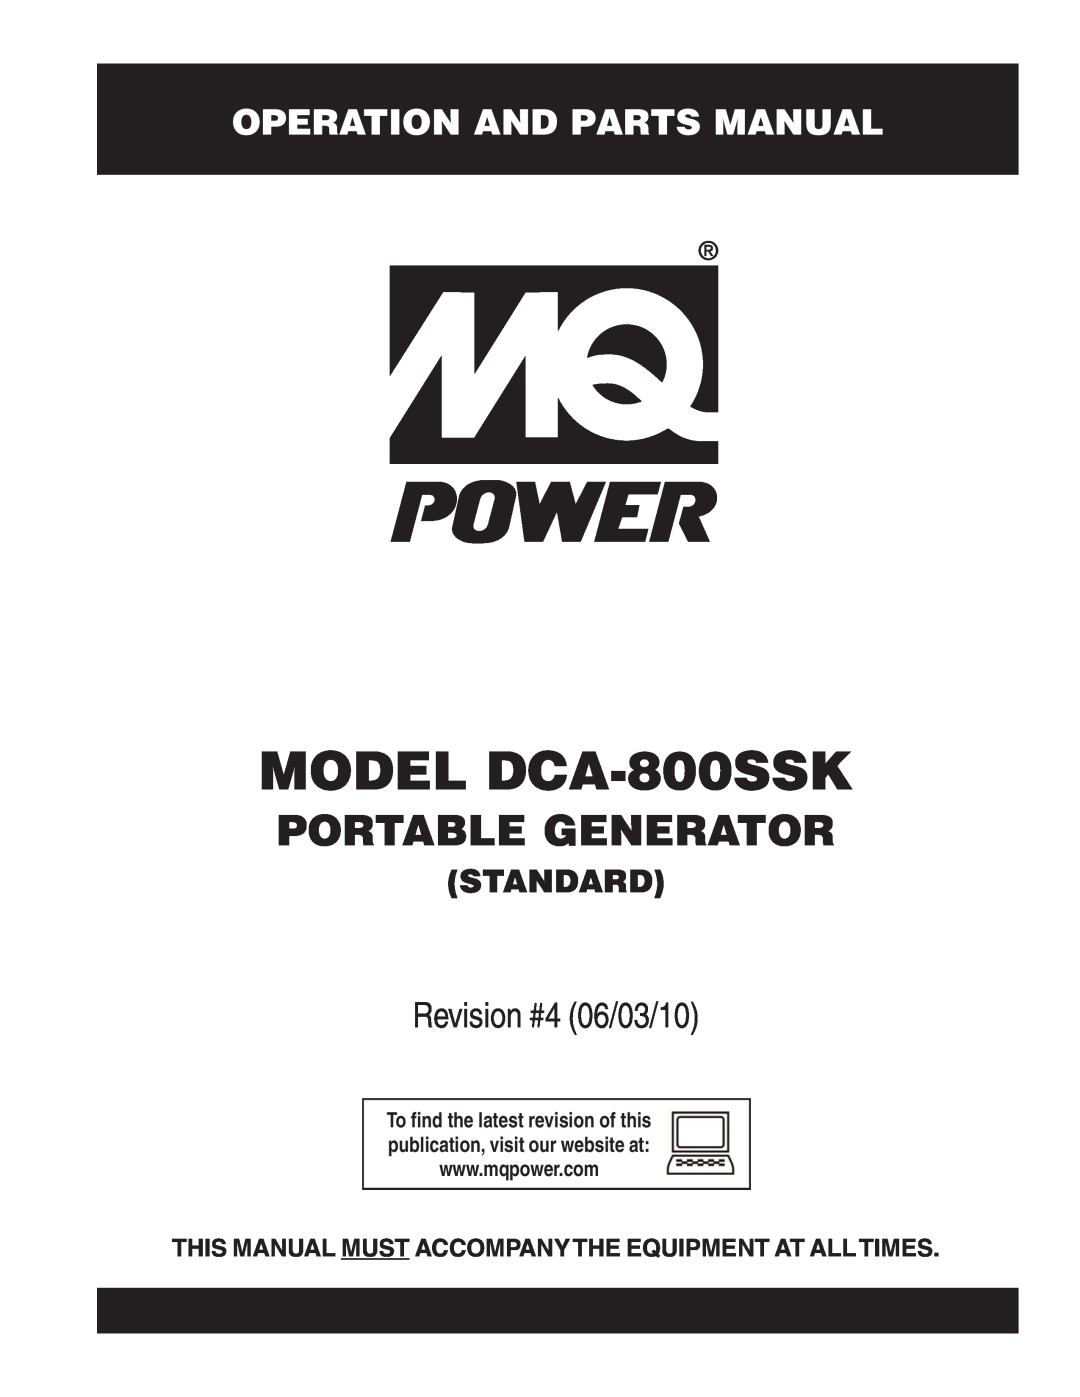 Multiquip operation manual Operation And Parts Manual, Standard, MODEL DCA-800SSK, Portable Generator 